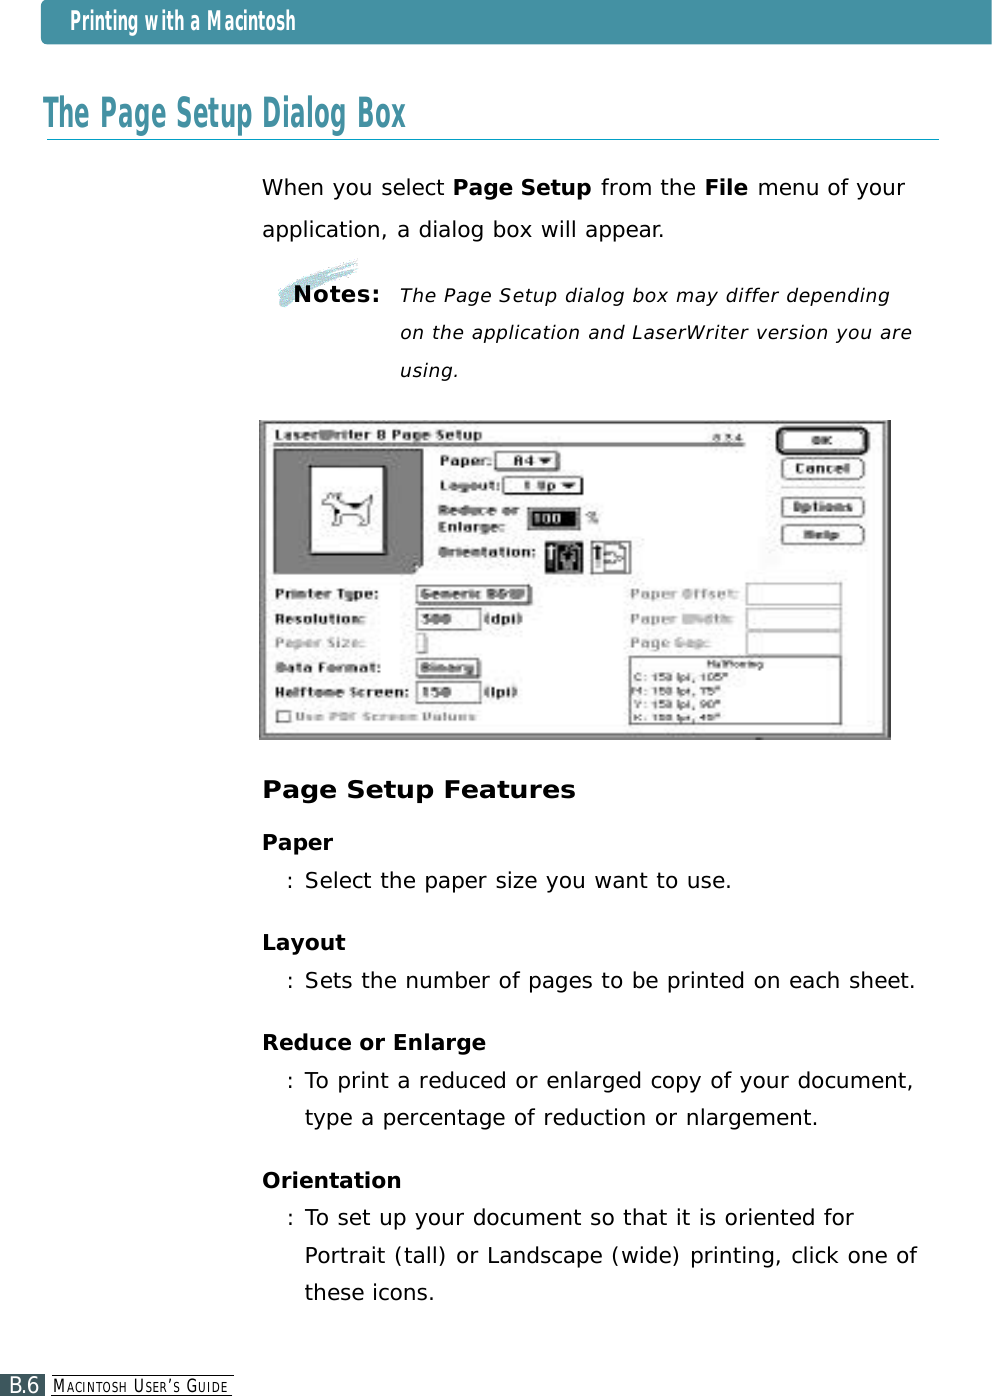 The Page Setup Dialog BoxWhen you select Page Setup from the File menu of yourapplication, a dialog box will appear.Page Setup FeaturesPaper: Select the paper size you want to use.Layout:Sets the number of pages to be printed on each sheet.Reduce or Enlarge: To print a reduced or enlarged copy of your document,type a percentage of reduction or nlargement.Orientation: To set up your document so that it is oriented forPortrait (tall) or Landscape (wide) printing, click one ofthese icons.Notes:  The Page Setup dialog box may differ depending on the application and LaserWriter version you areu s i n g .Printing with a MacintoshMA C I N T O S H US E R’SGU I D EB.6